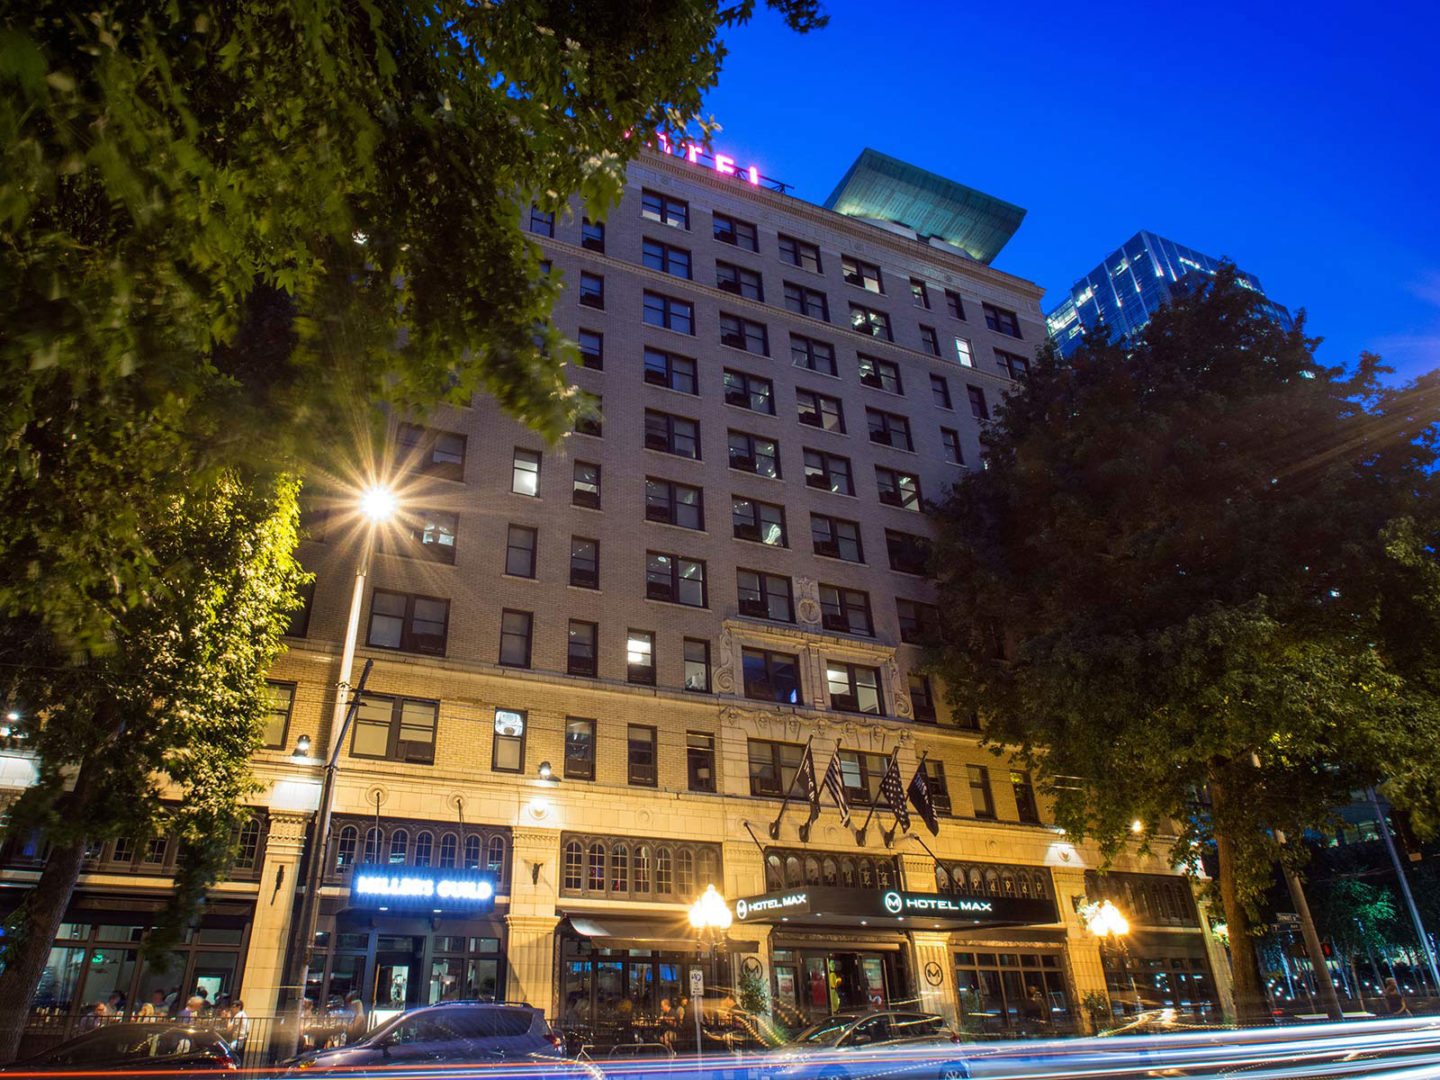 Hotel Max is a gay and lesbian friendly hotel in Seattle, United States.